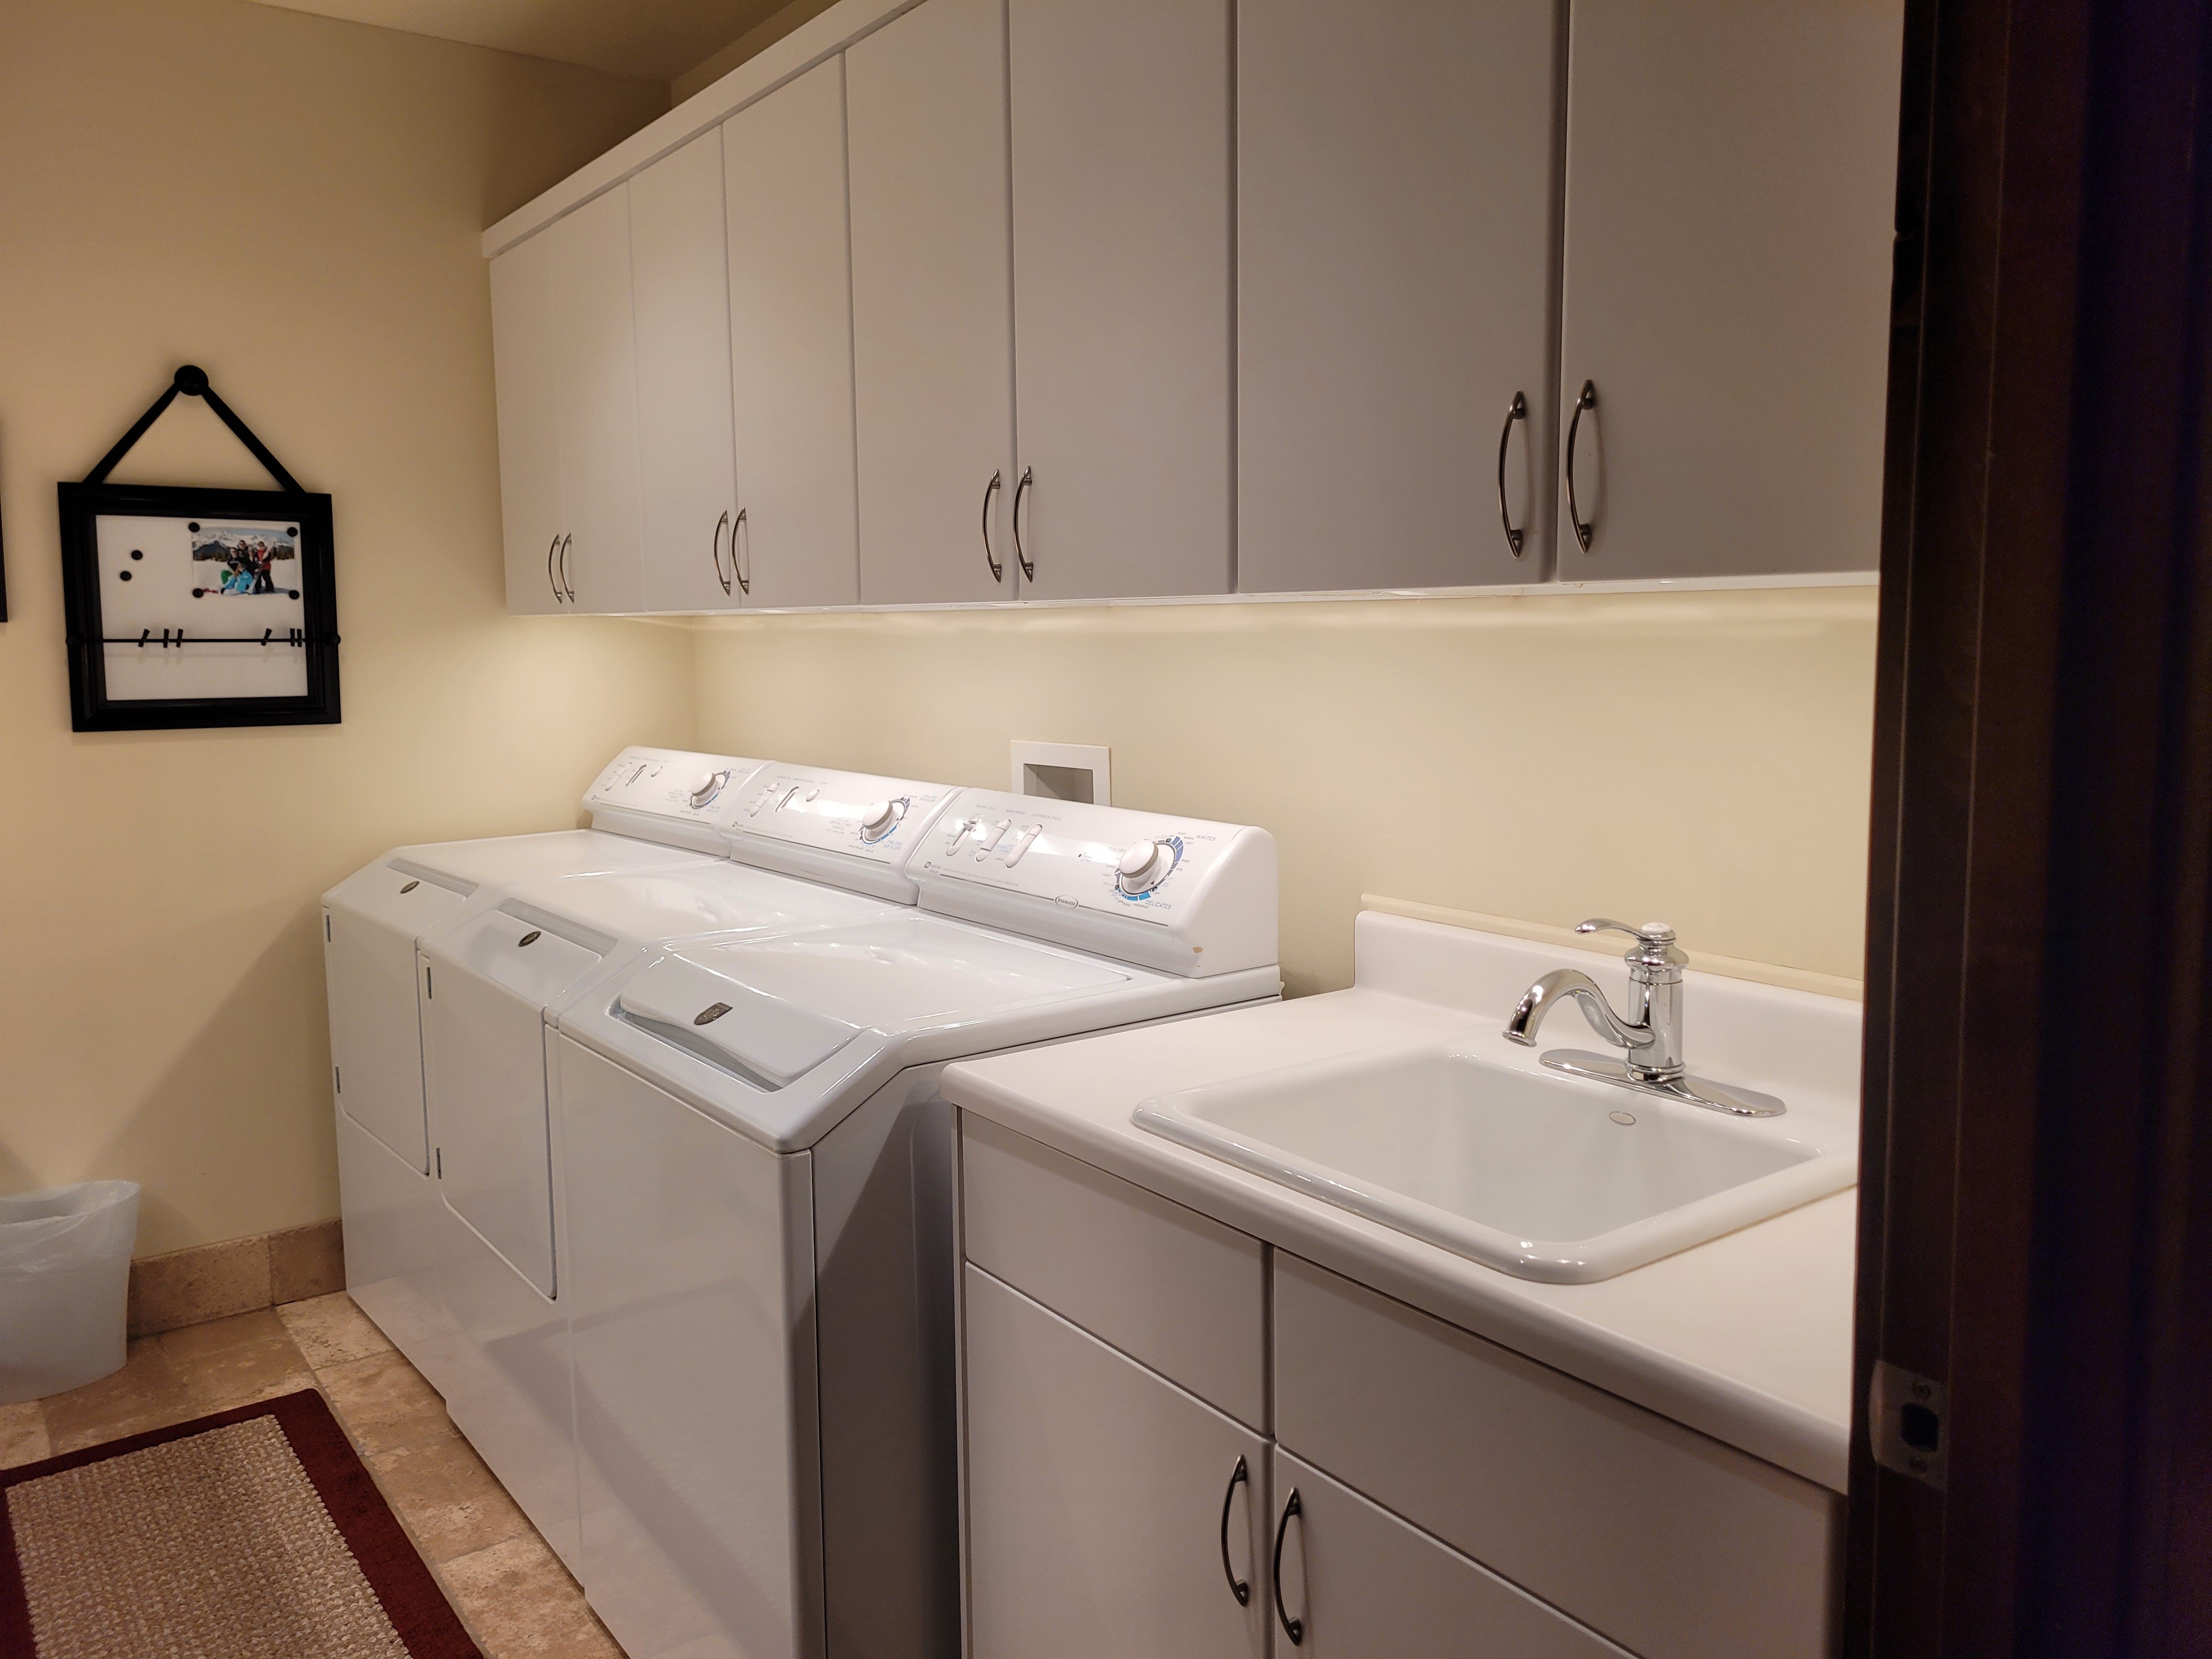 Laundry room with large washer and dryer and utility sink